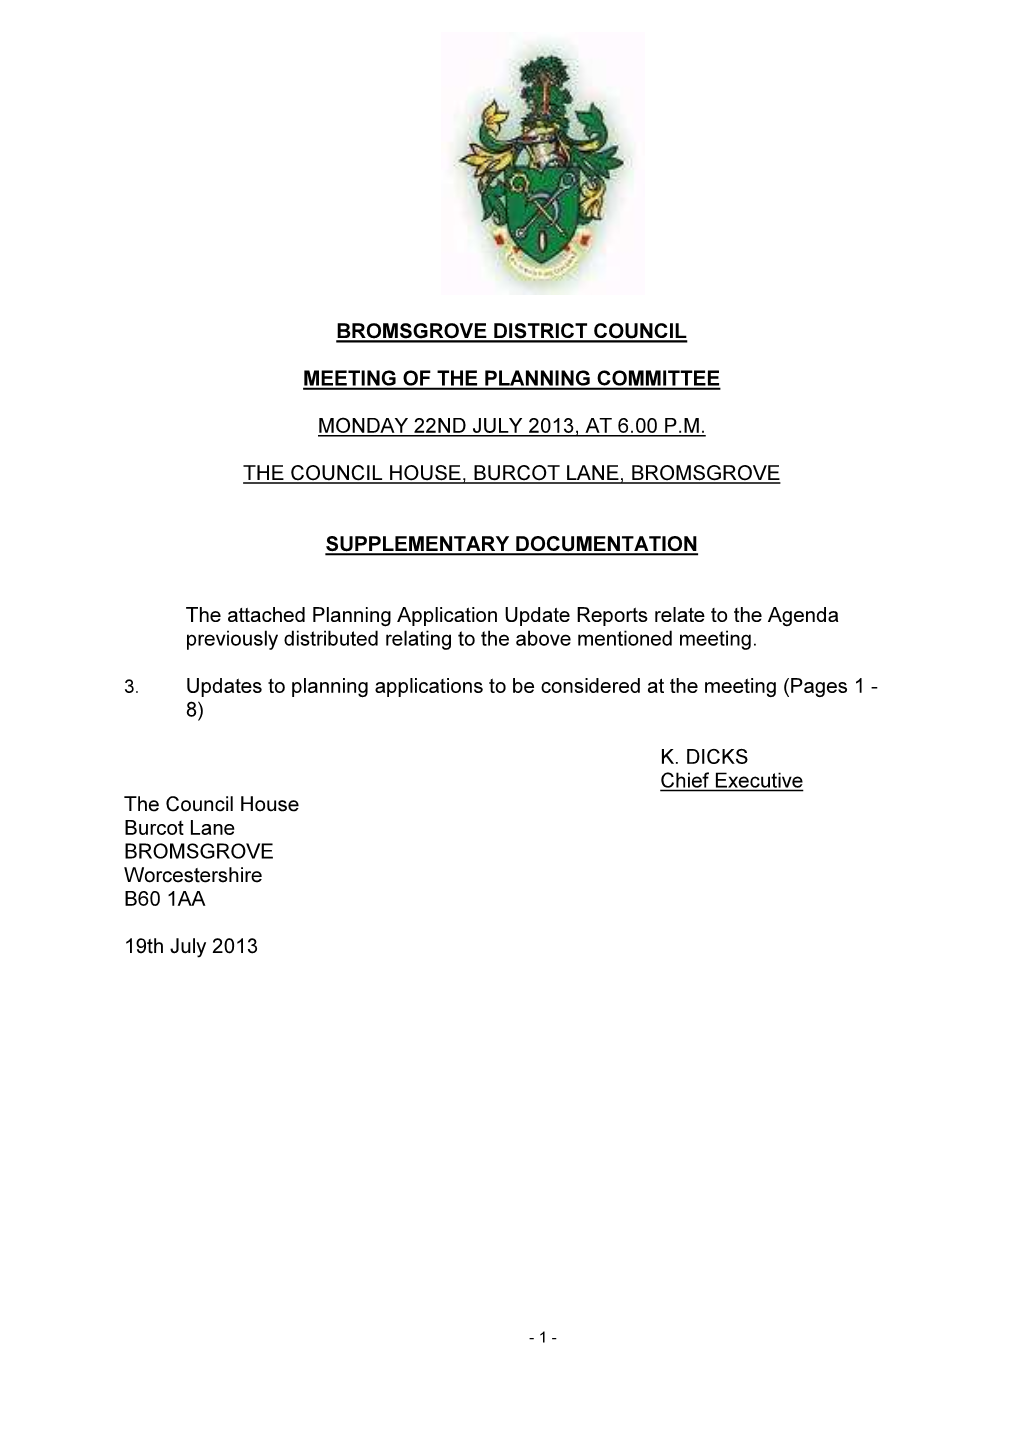 Bromsgrove District Council Meeting of the Planning